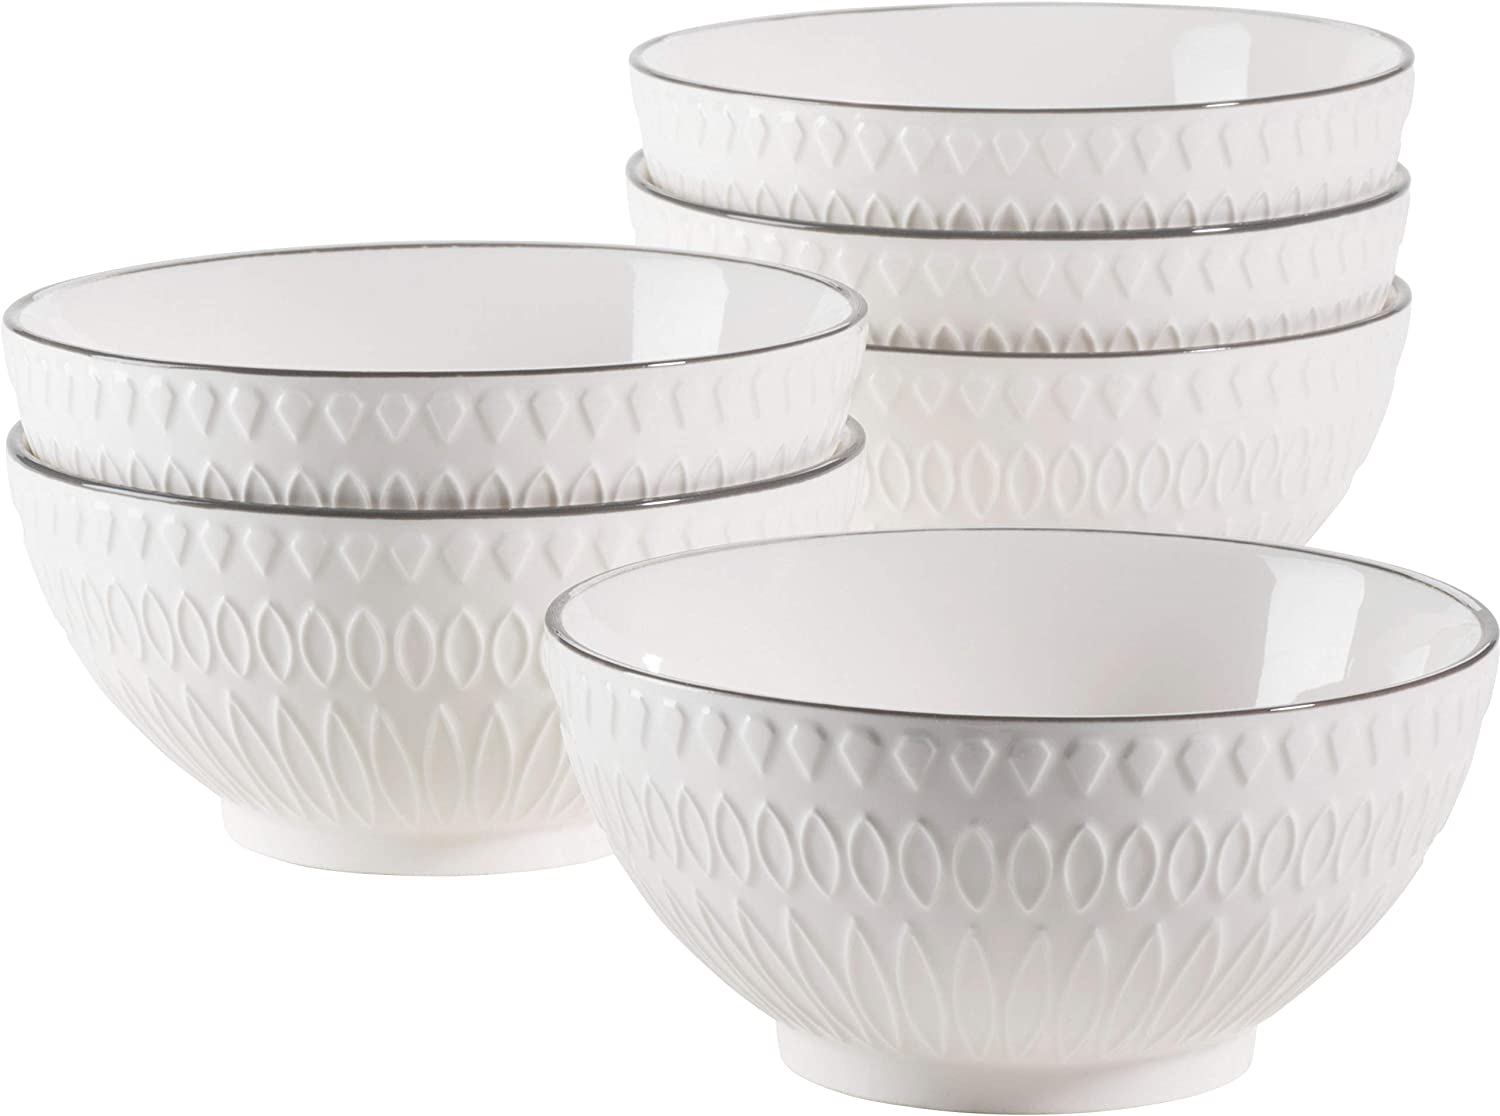 Maser MÄSER 931576 Telde Series Cereal Bowls Set in Catering Quality, 6 Bowls with Pretty Relief Surface, Durable Porcelain, White